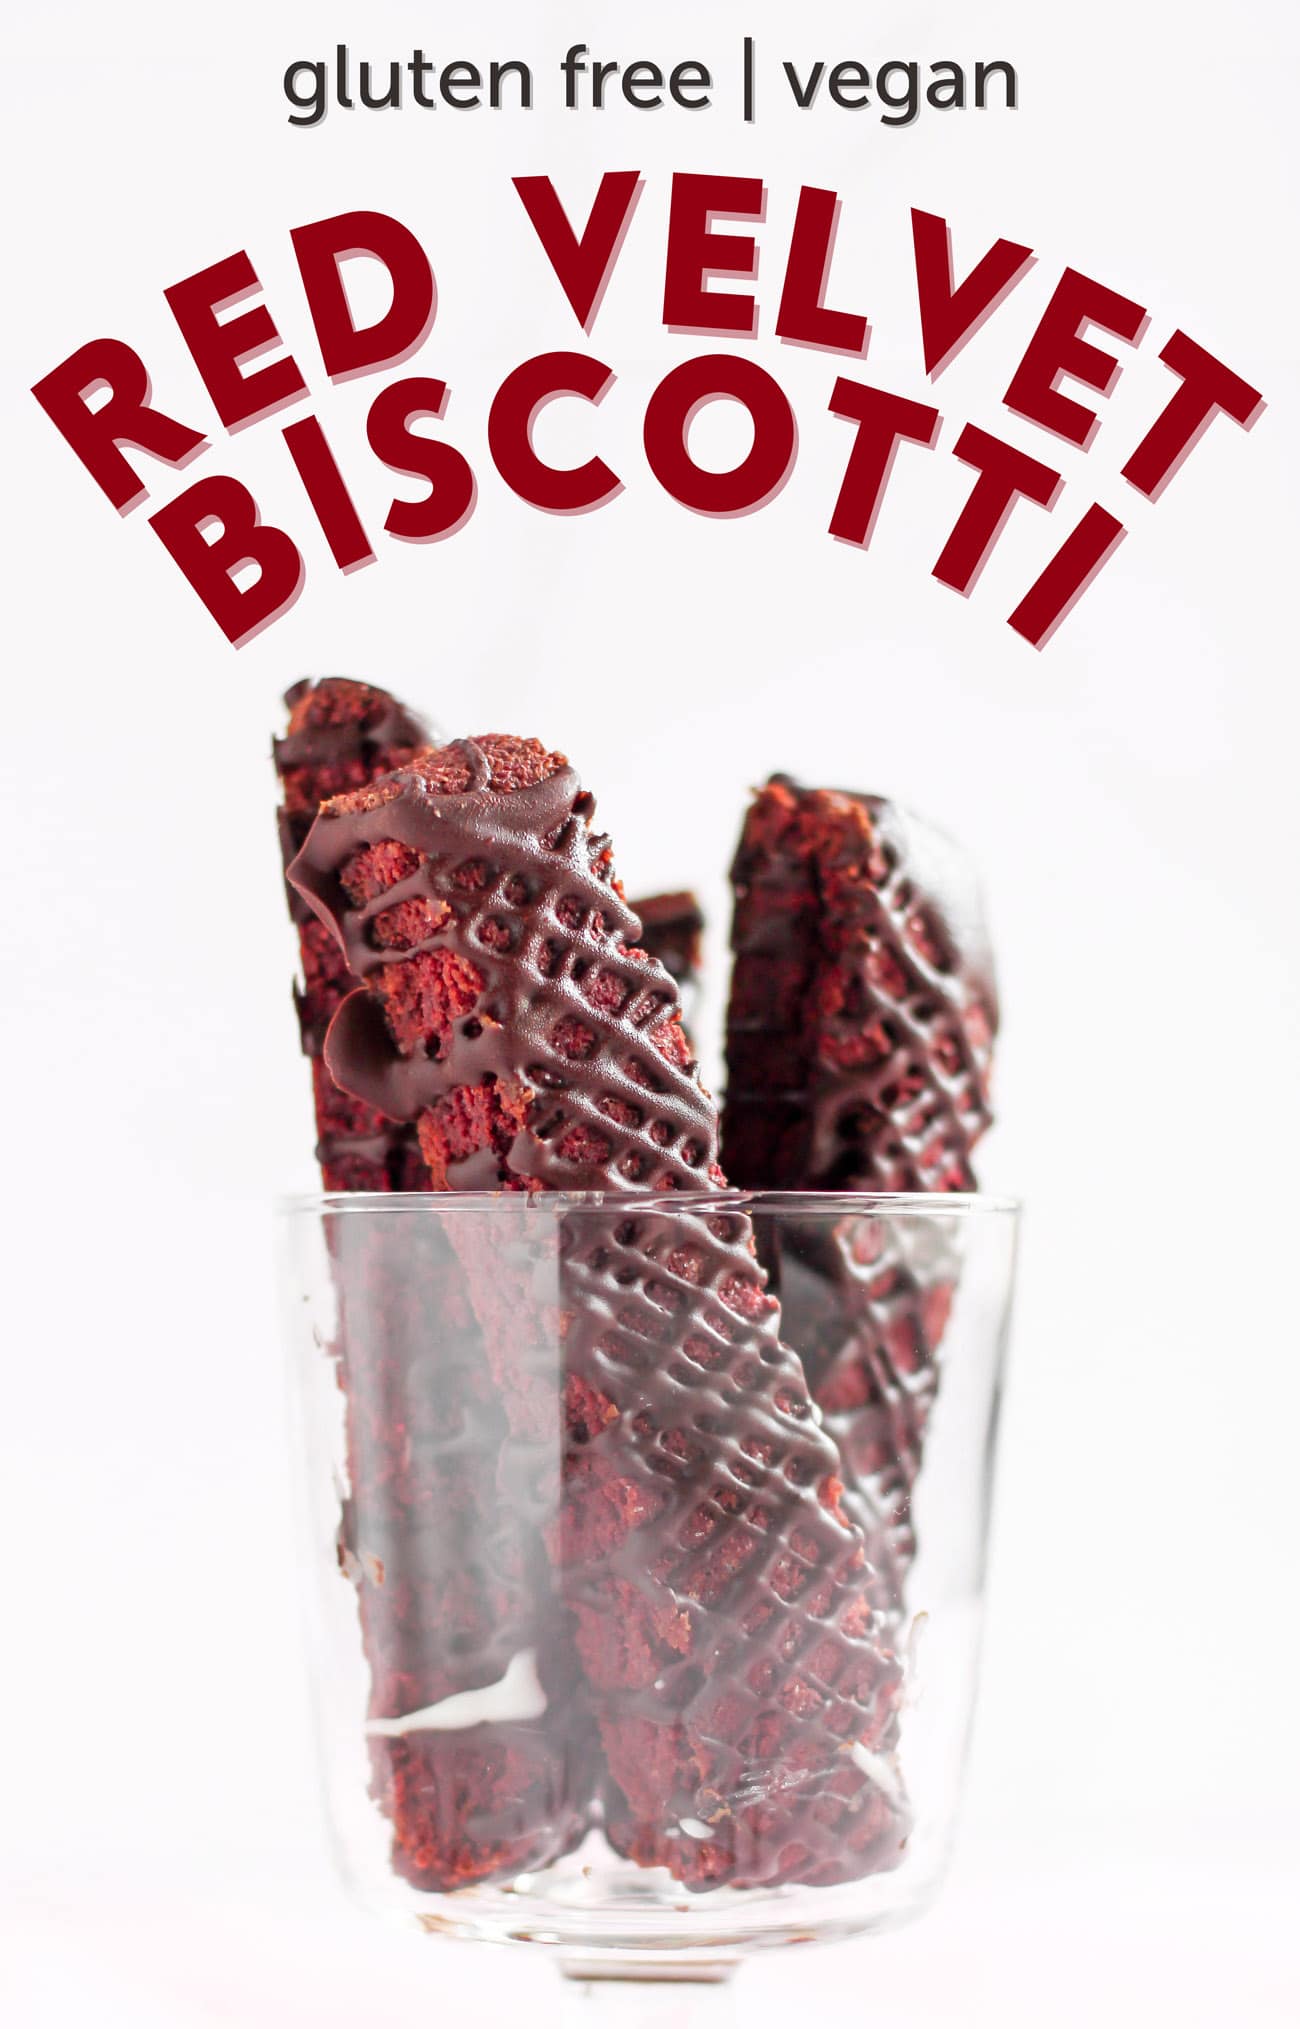 This NATURALLY RED Red Velvet Biscotti is crunchy, sweet, and drizzled with chocolate. You’d never know it’s sugar free, gluten free, dairy free, and vegan! Instead of flour, we use almond meal. Instead of butter (and to add color), we use beets. Instead of eggs, we use ground flaxseed meal!